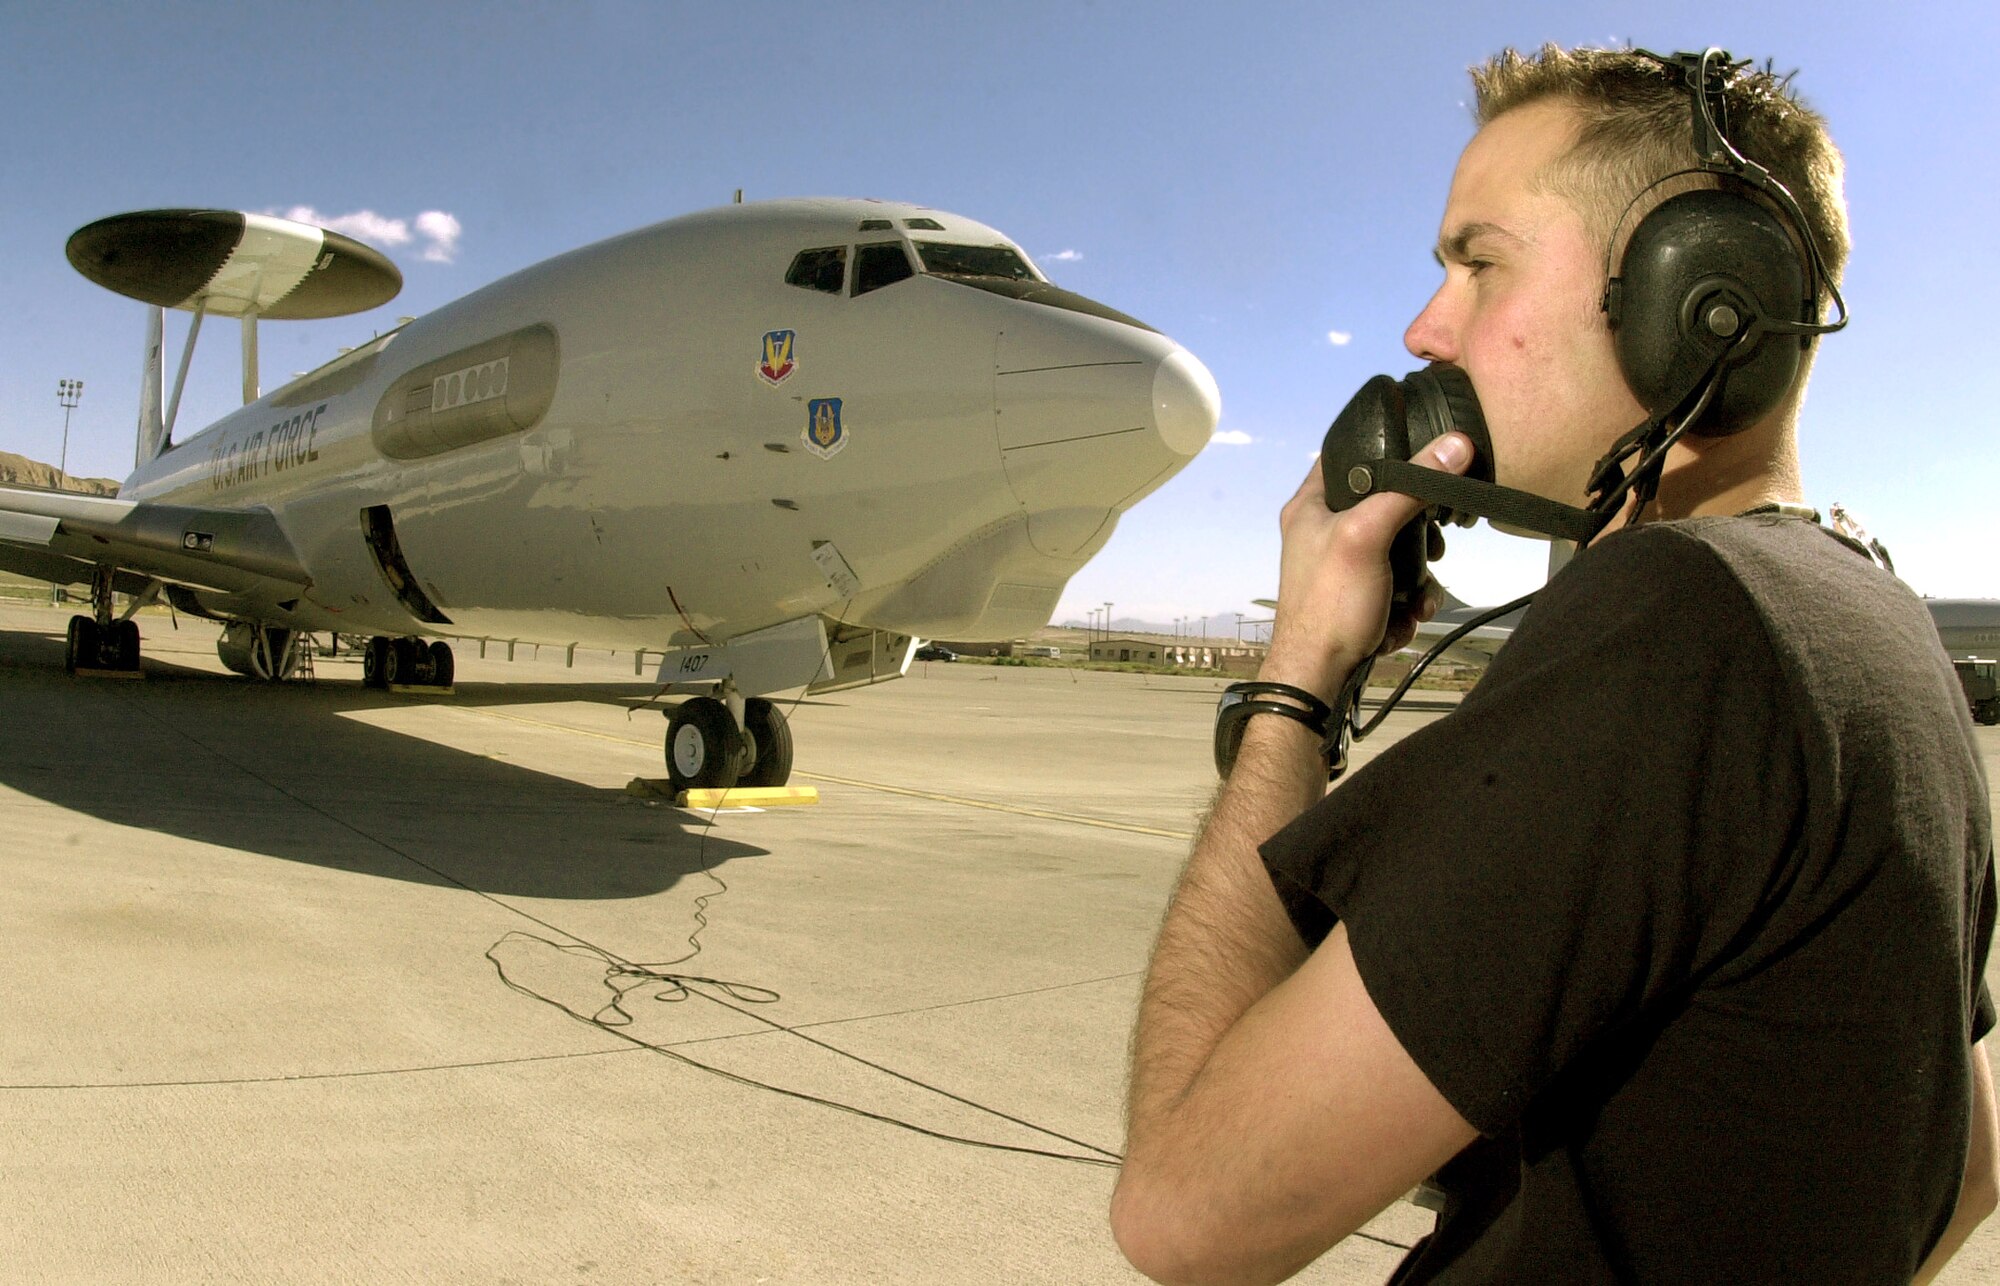 NELLIS AIR FORCE BASE, Nev. -- Staff Sgt. Trevor Wilson prepares an E-3 Sentry Airborne Warning and Control System aircraft for flight during Joint Red Flag 2005 here March 28.  About 10,000 U.S. servicemembers and coalition forces are participating in the exercise here and at Fort Hood, Texas, and Fort Bliss, Texas, until April 2.  Sergeant Wilson is a crew chief with Air Force Reserve Command's 513th Air Control Group from Tinker Air Force Base, Okla.  (U.S. Air Force photo by Tech. Sgt. Patrick M. Kuminecz)